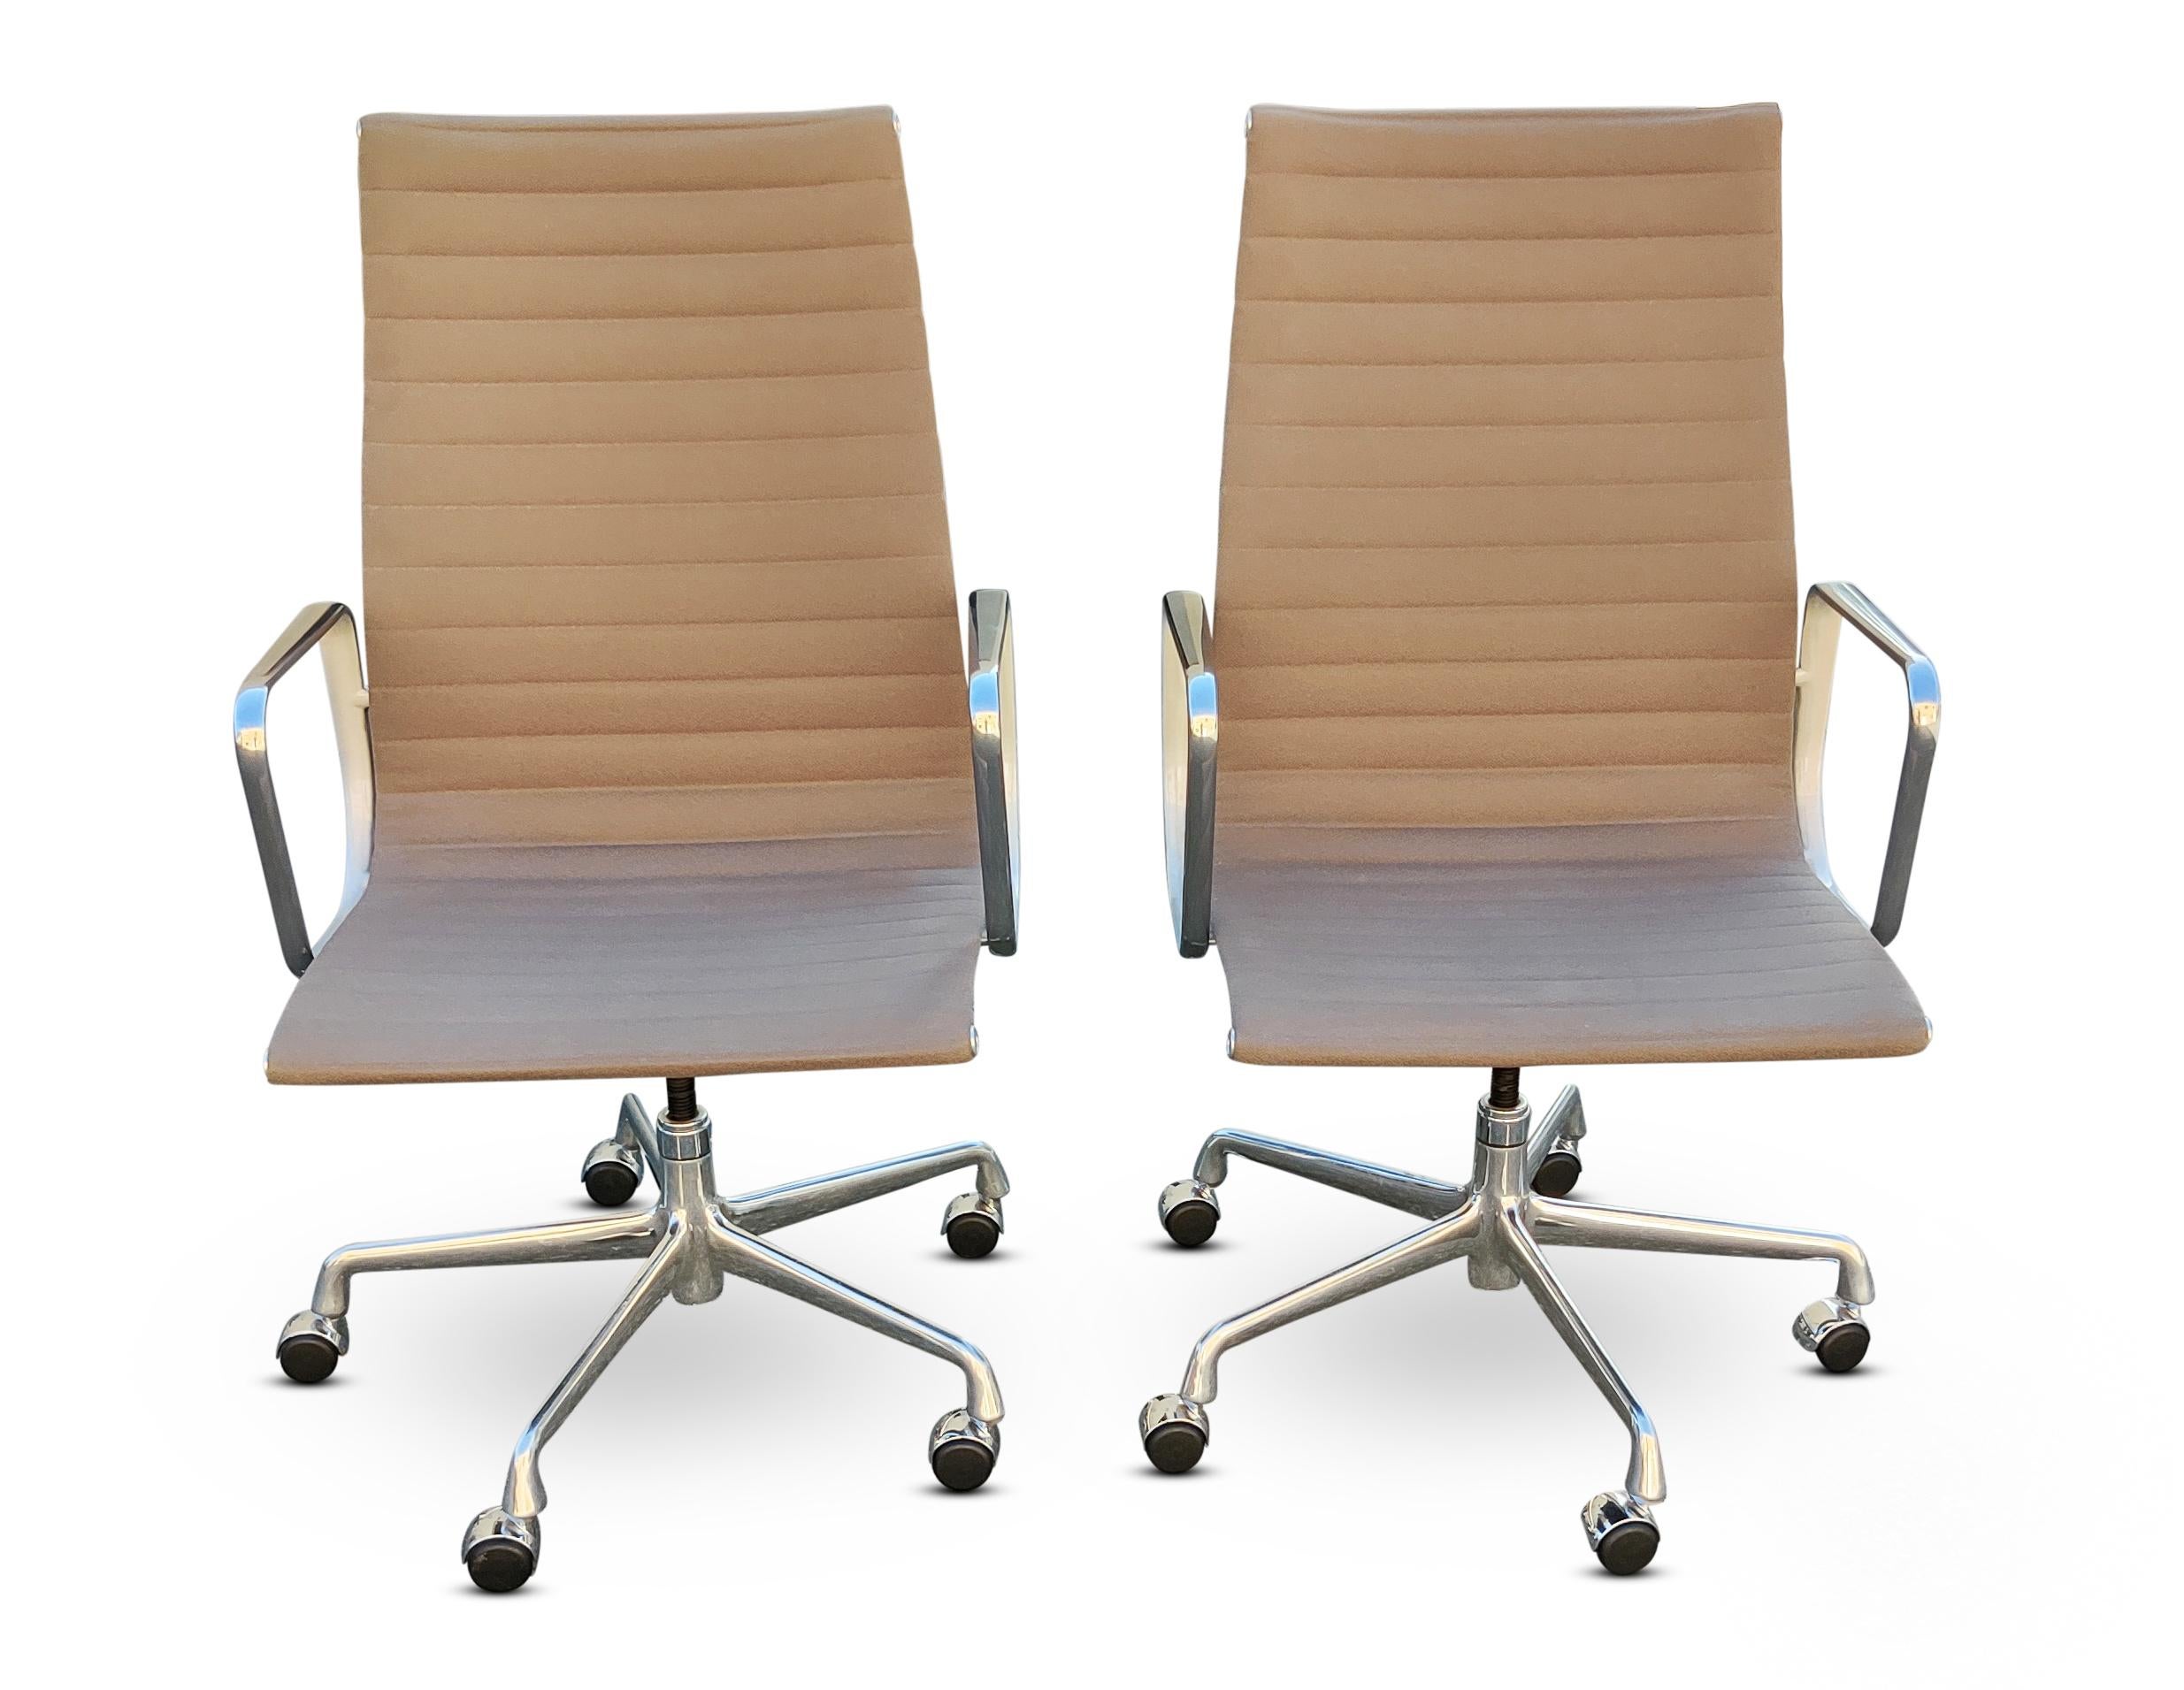 The Herman Miller Aluminum Group chair has been a staple of the upscale business and home office environment for nearly half a century. It was originally designed by Charles and Ray Eames, and this set is especially high-end because of its tall